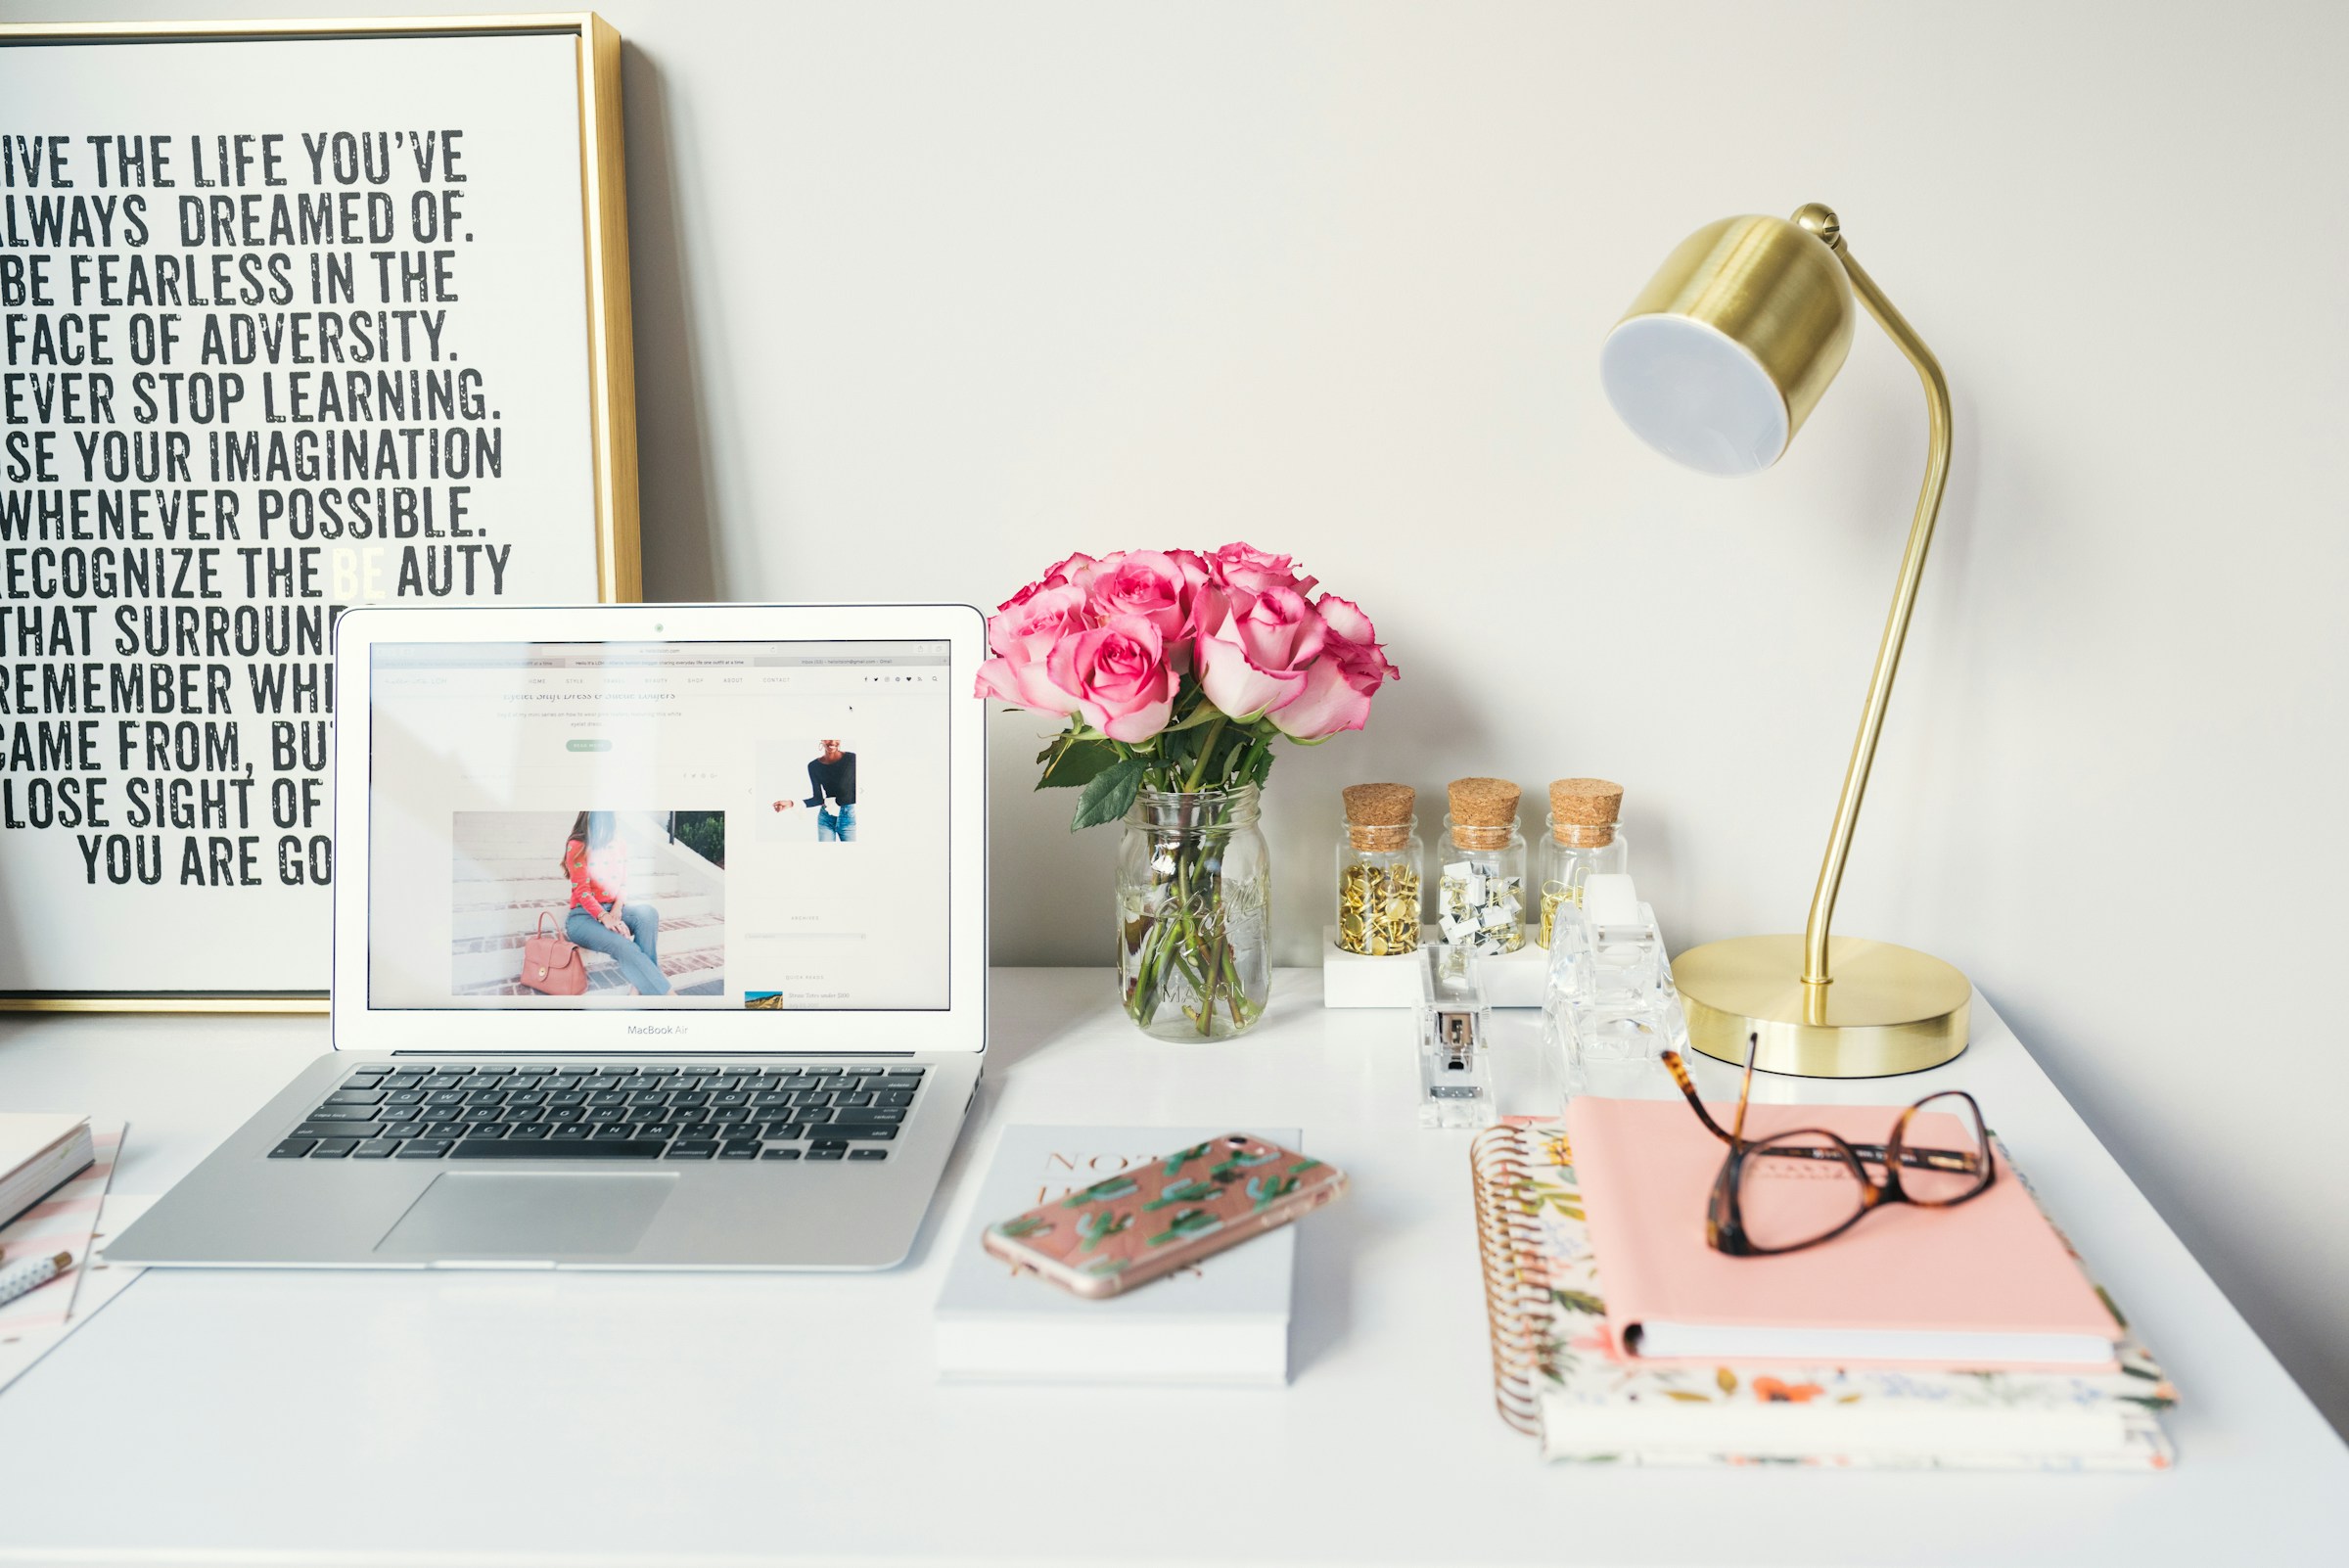 Image of a sleek table with a poster, open laptop, bunch of roses, stationary and a lamp.

Photo by Arnel Hasanovic on Unsplash